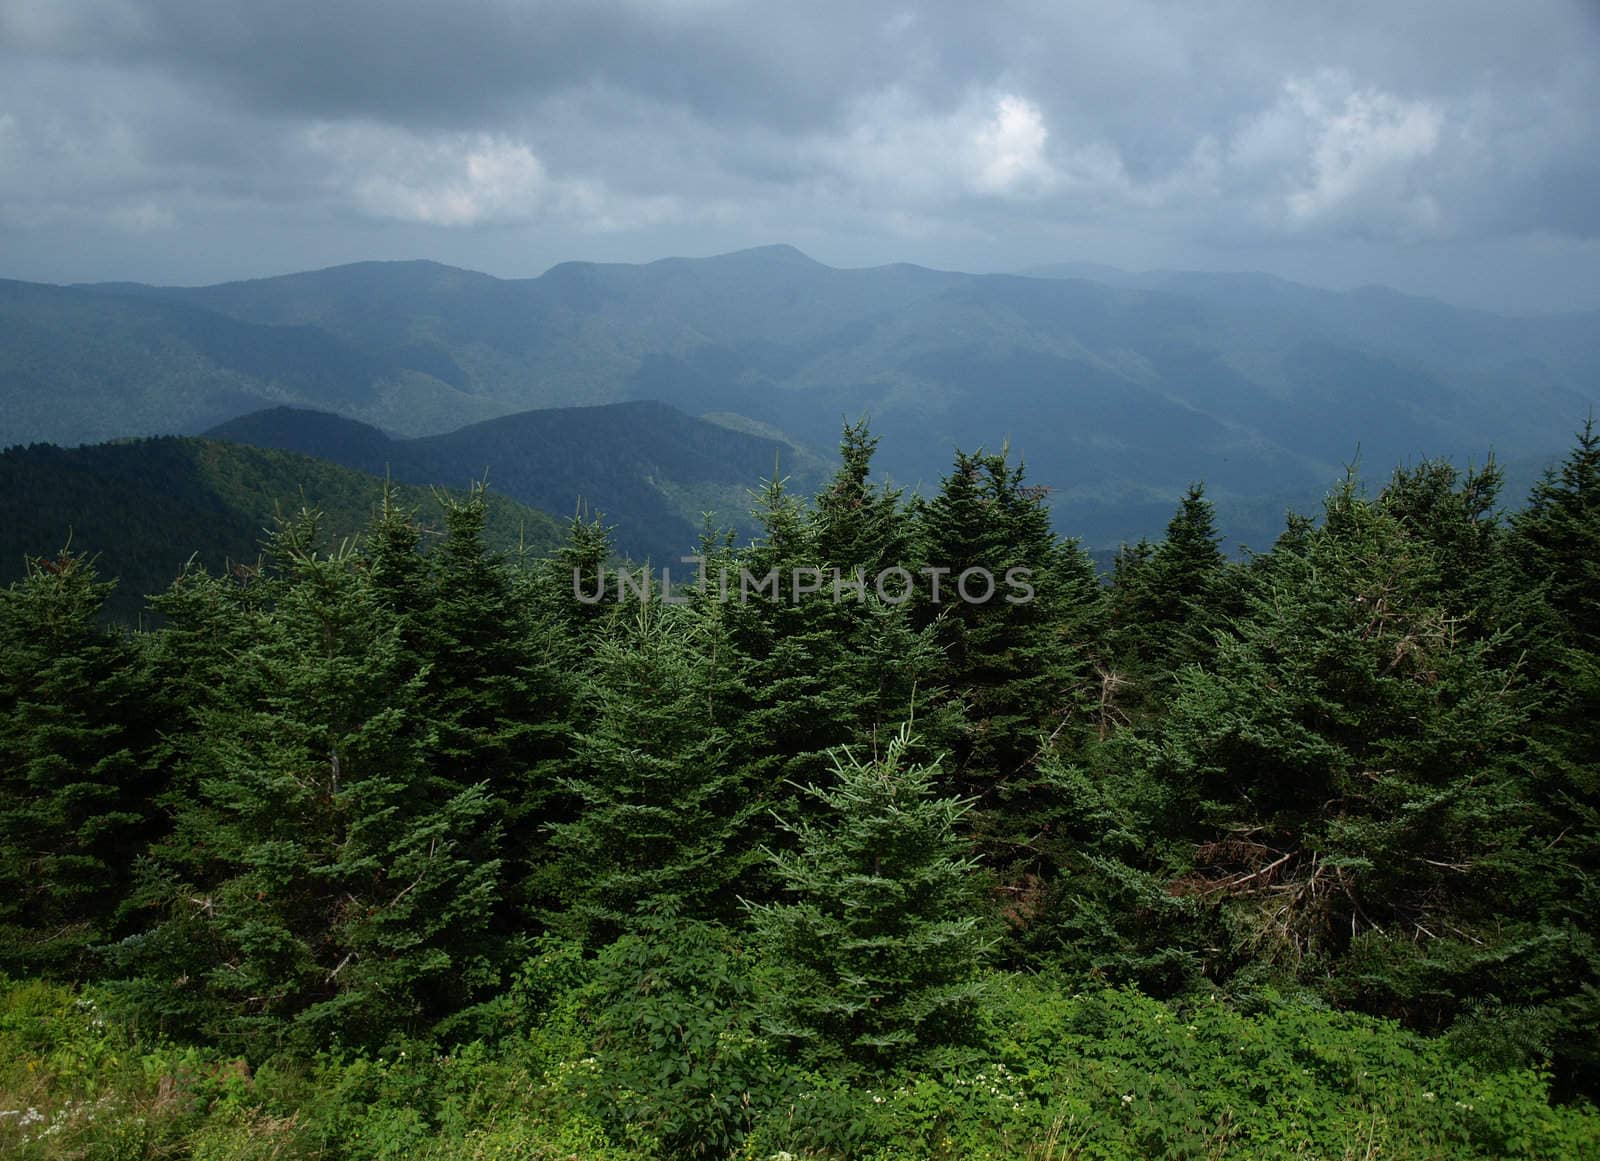 View along the trail up Mt. Mitchell in North Carolina